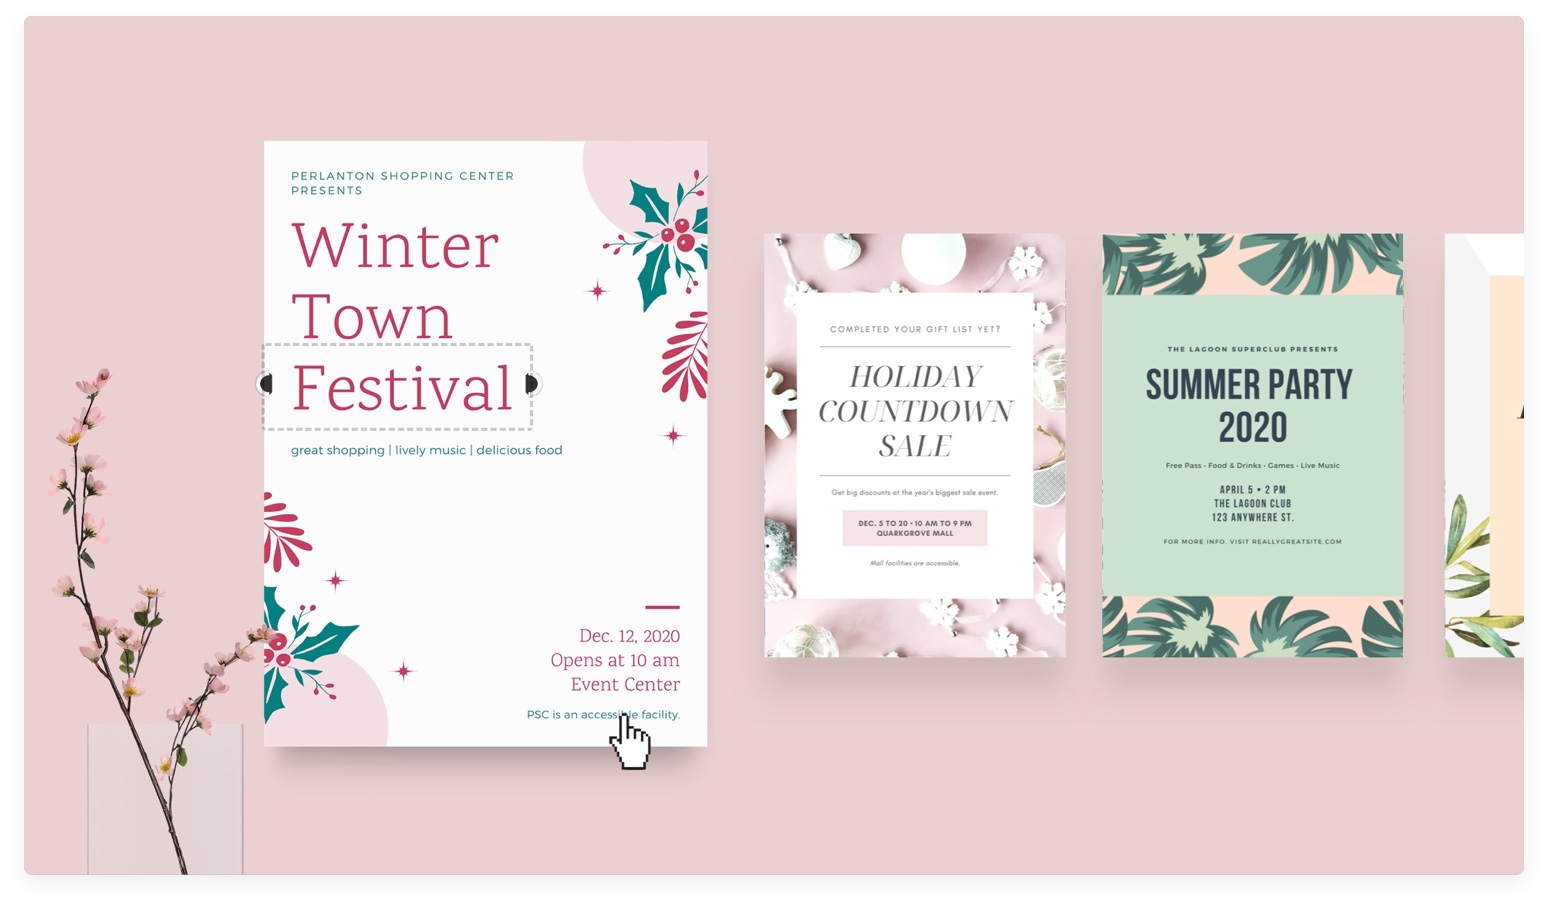 Free Online Flyer Maker: Design Custom Flyers With Canva - About Canva - Create Your Own Free Printable Flyers